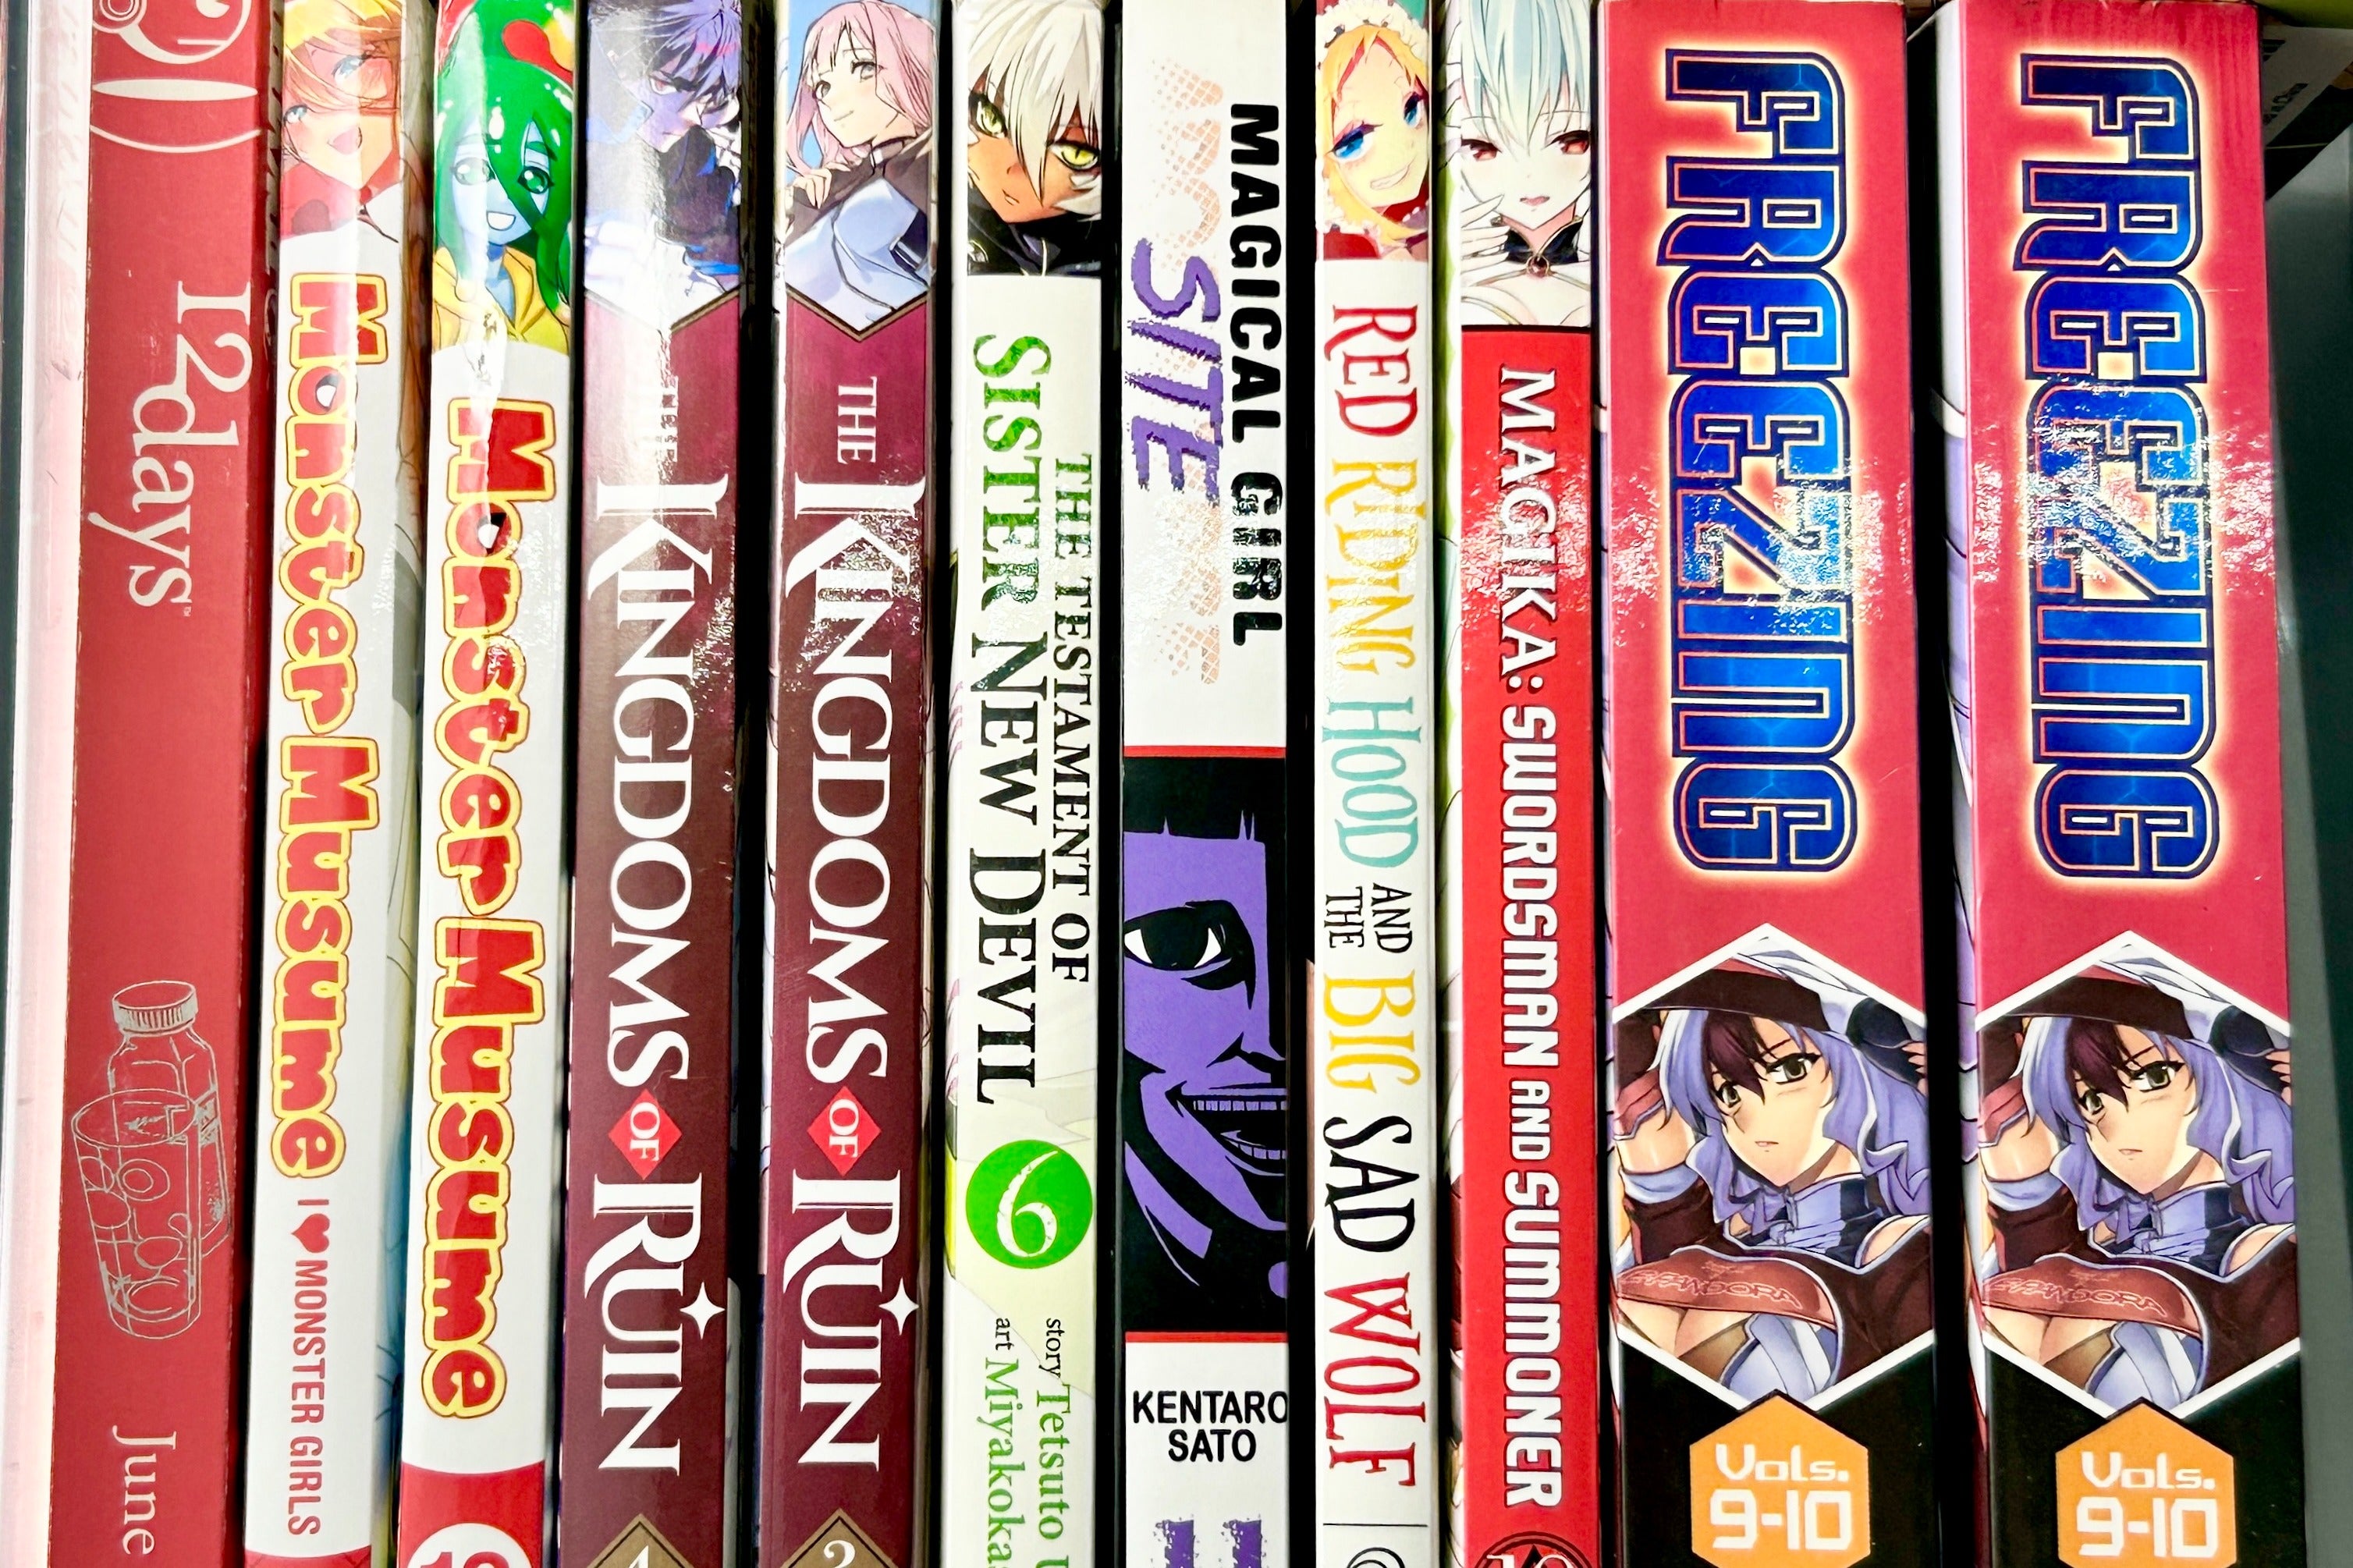 Monthly Mature Manga (18+ only) Box (5 Books per month) - Cratejoy